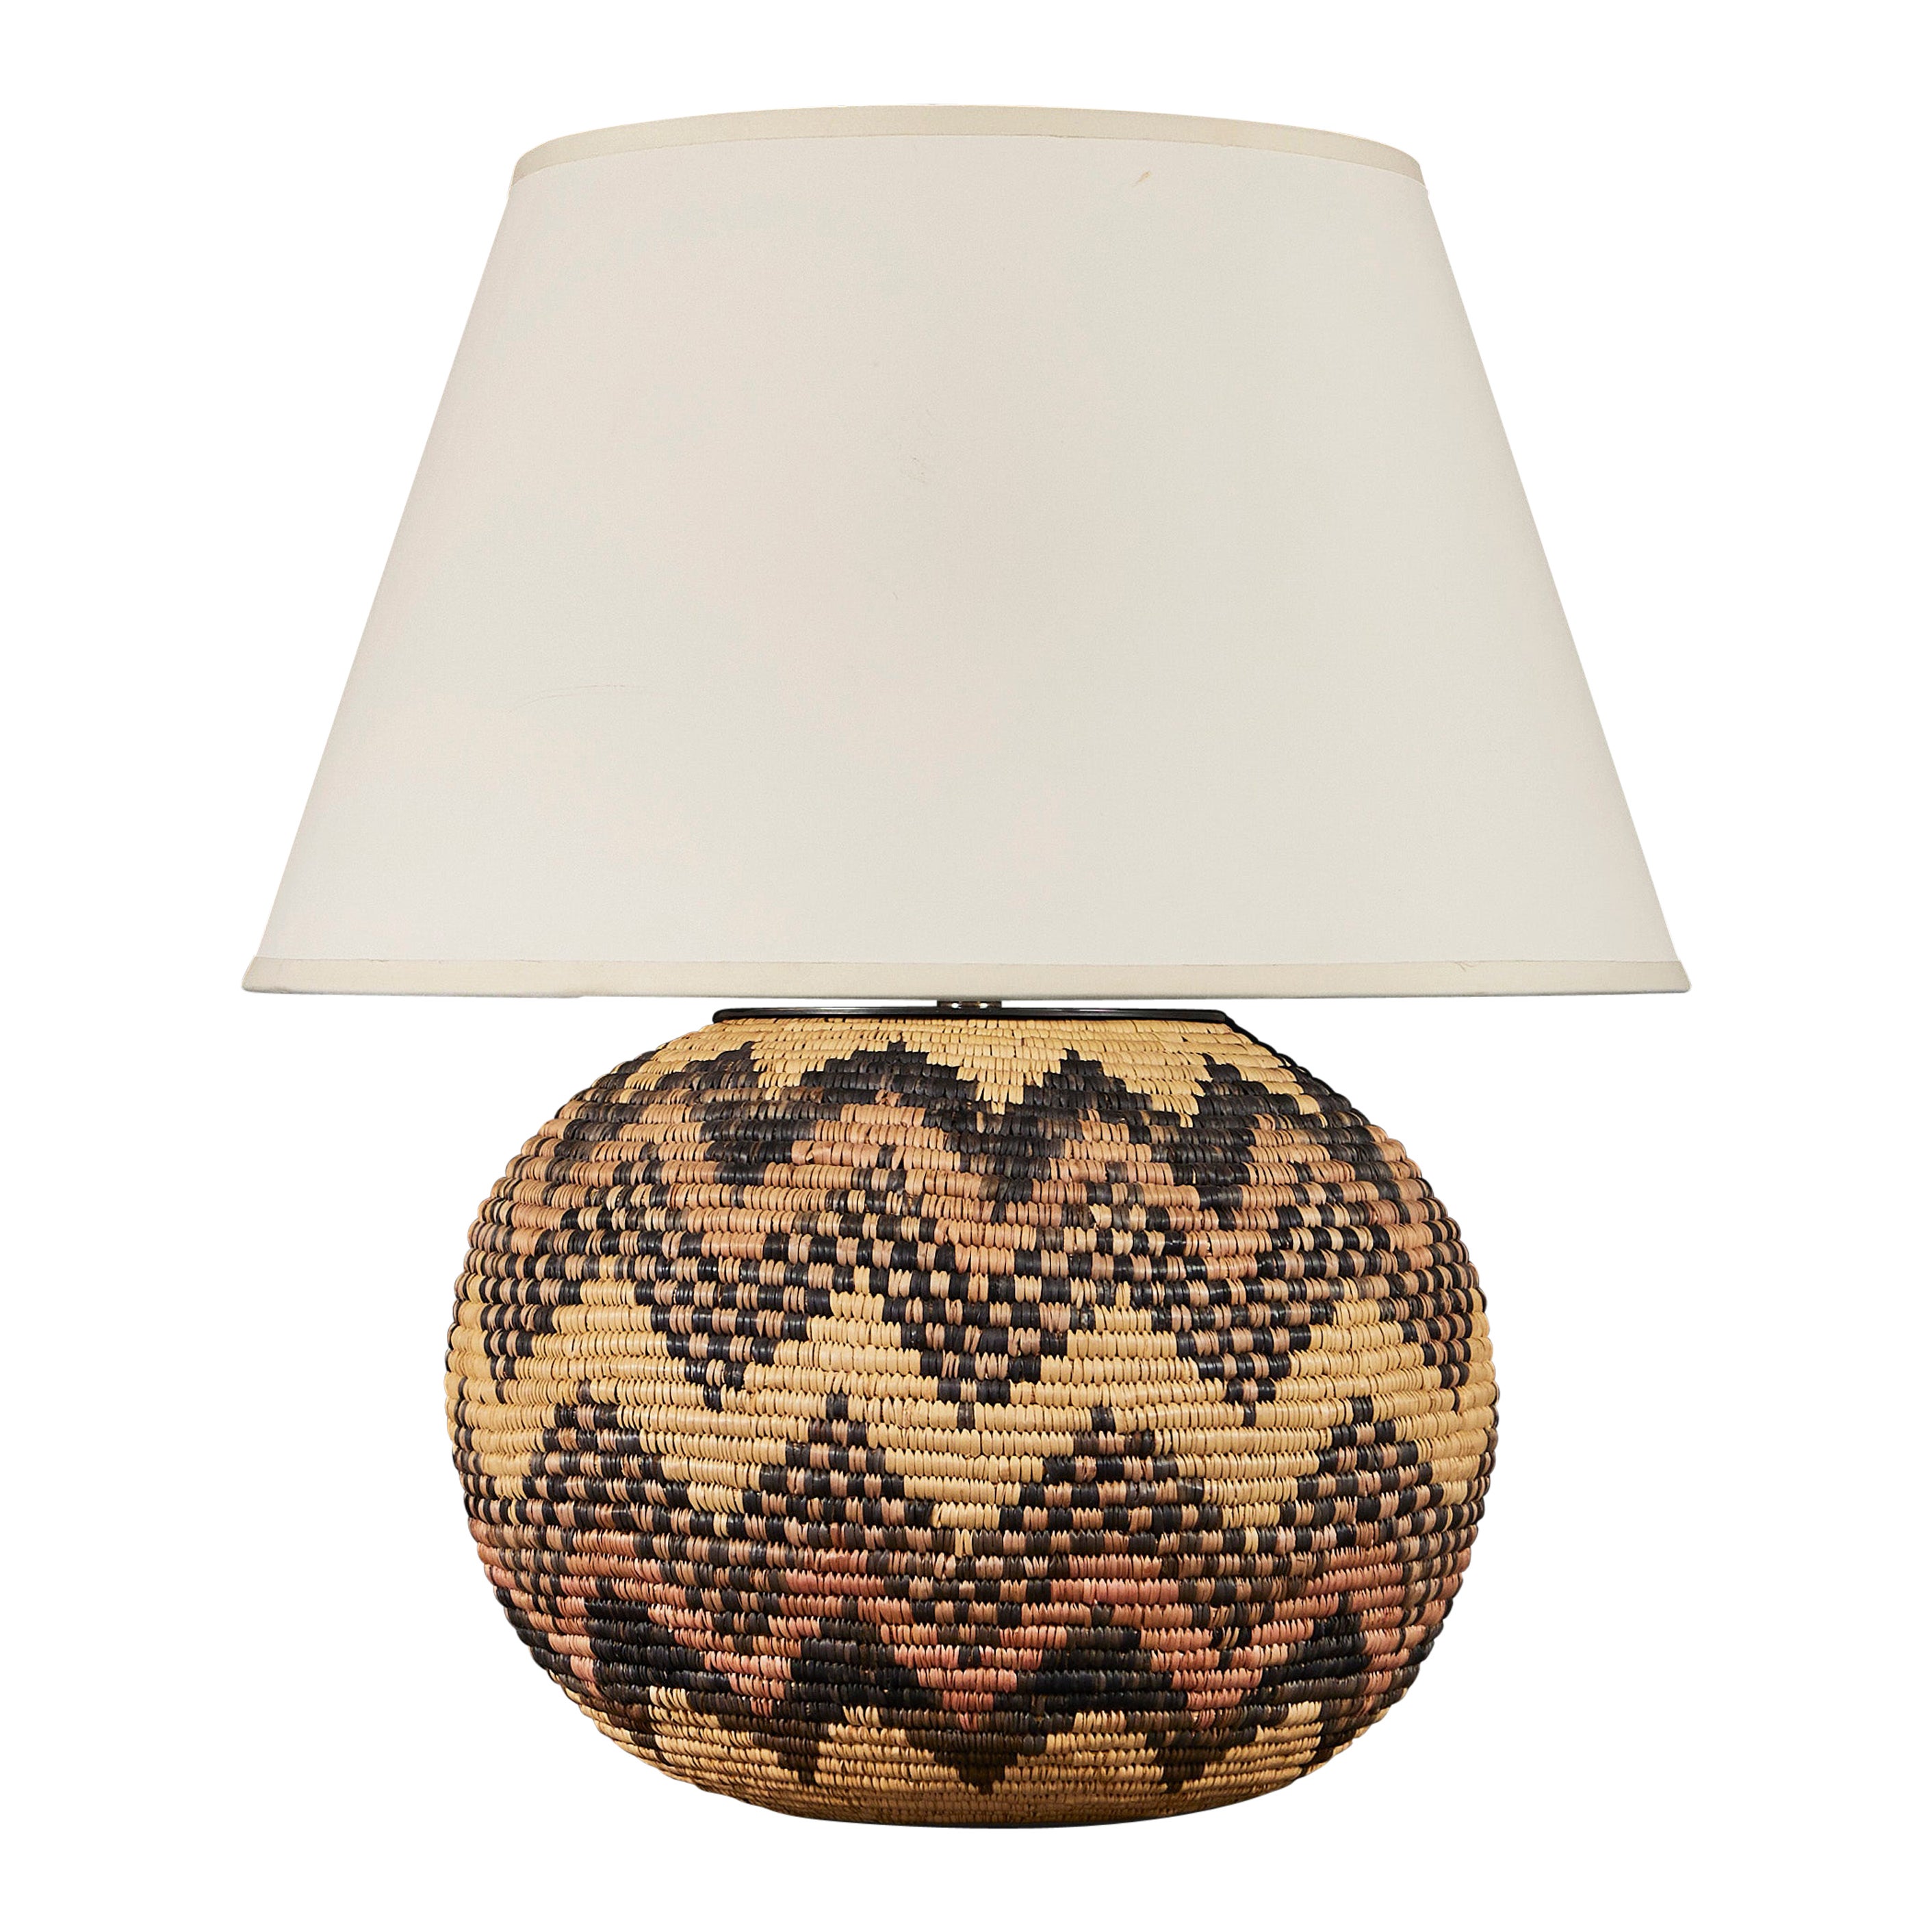 A Zigzag Basket Weave Lamp For Sale